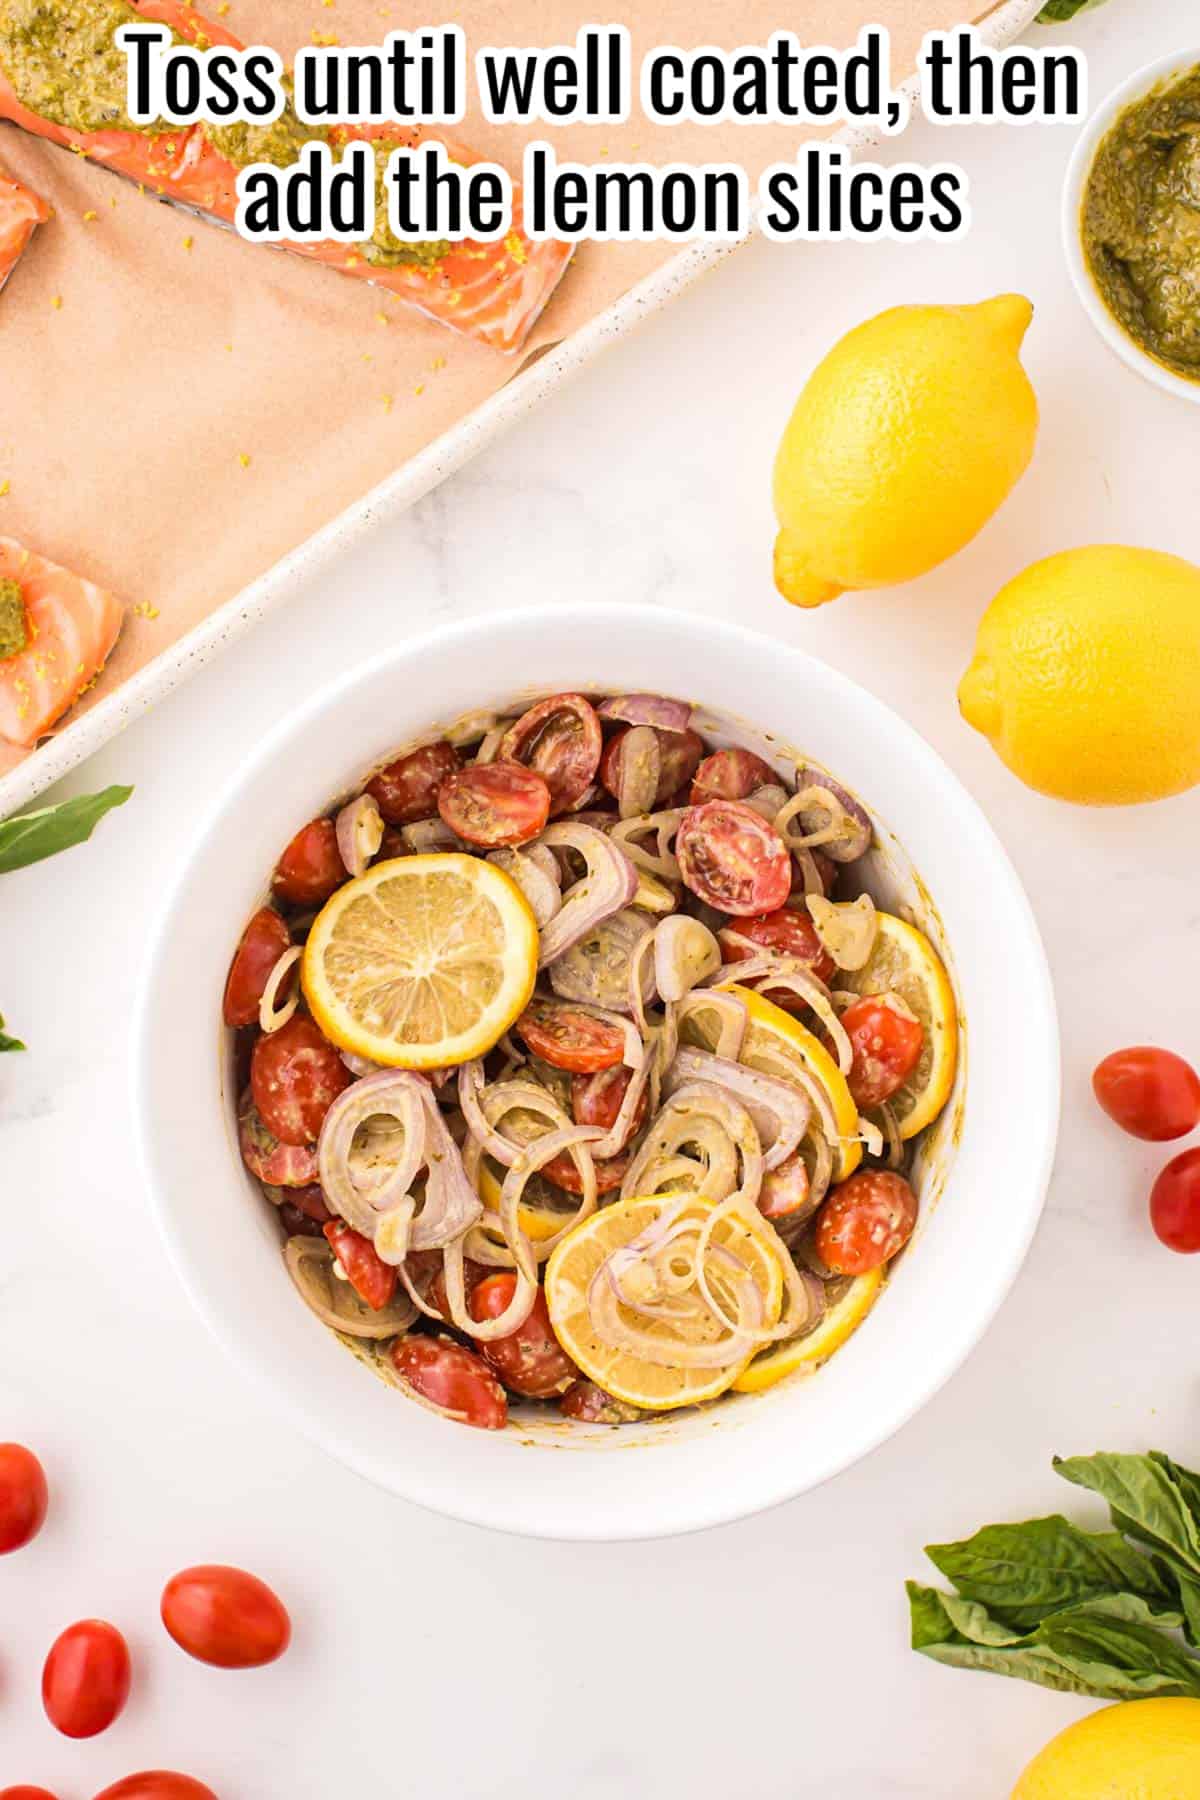 tomatoes, shallots and pesto in a bowl with lemon slices.